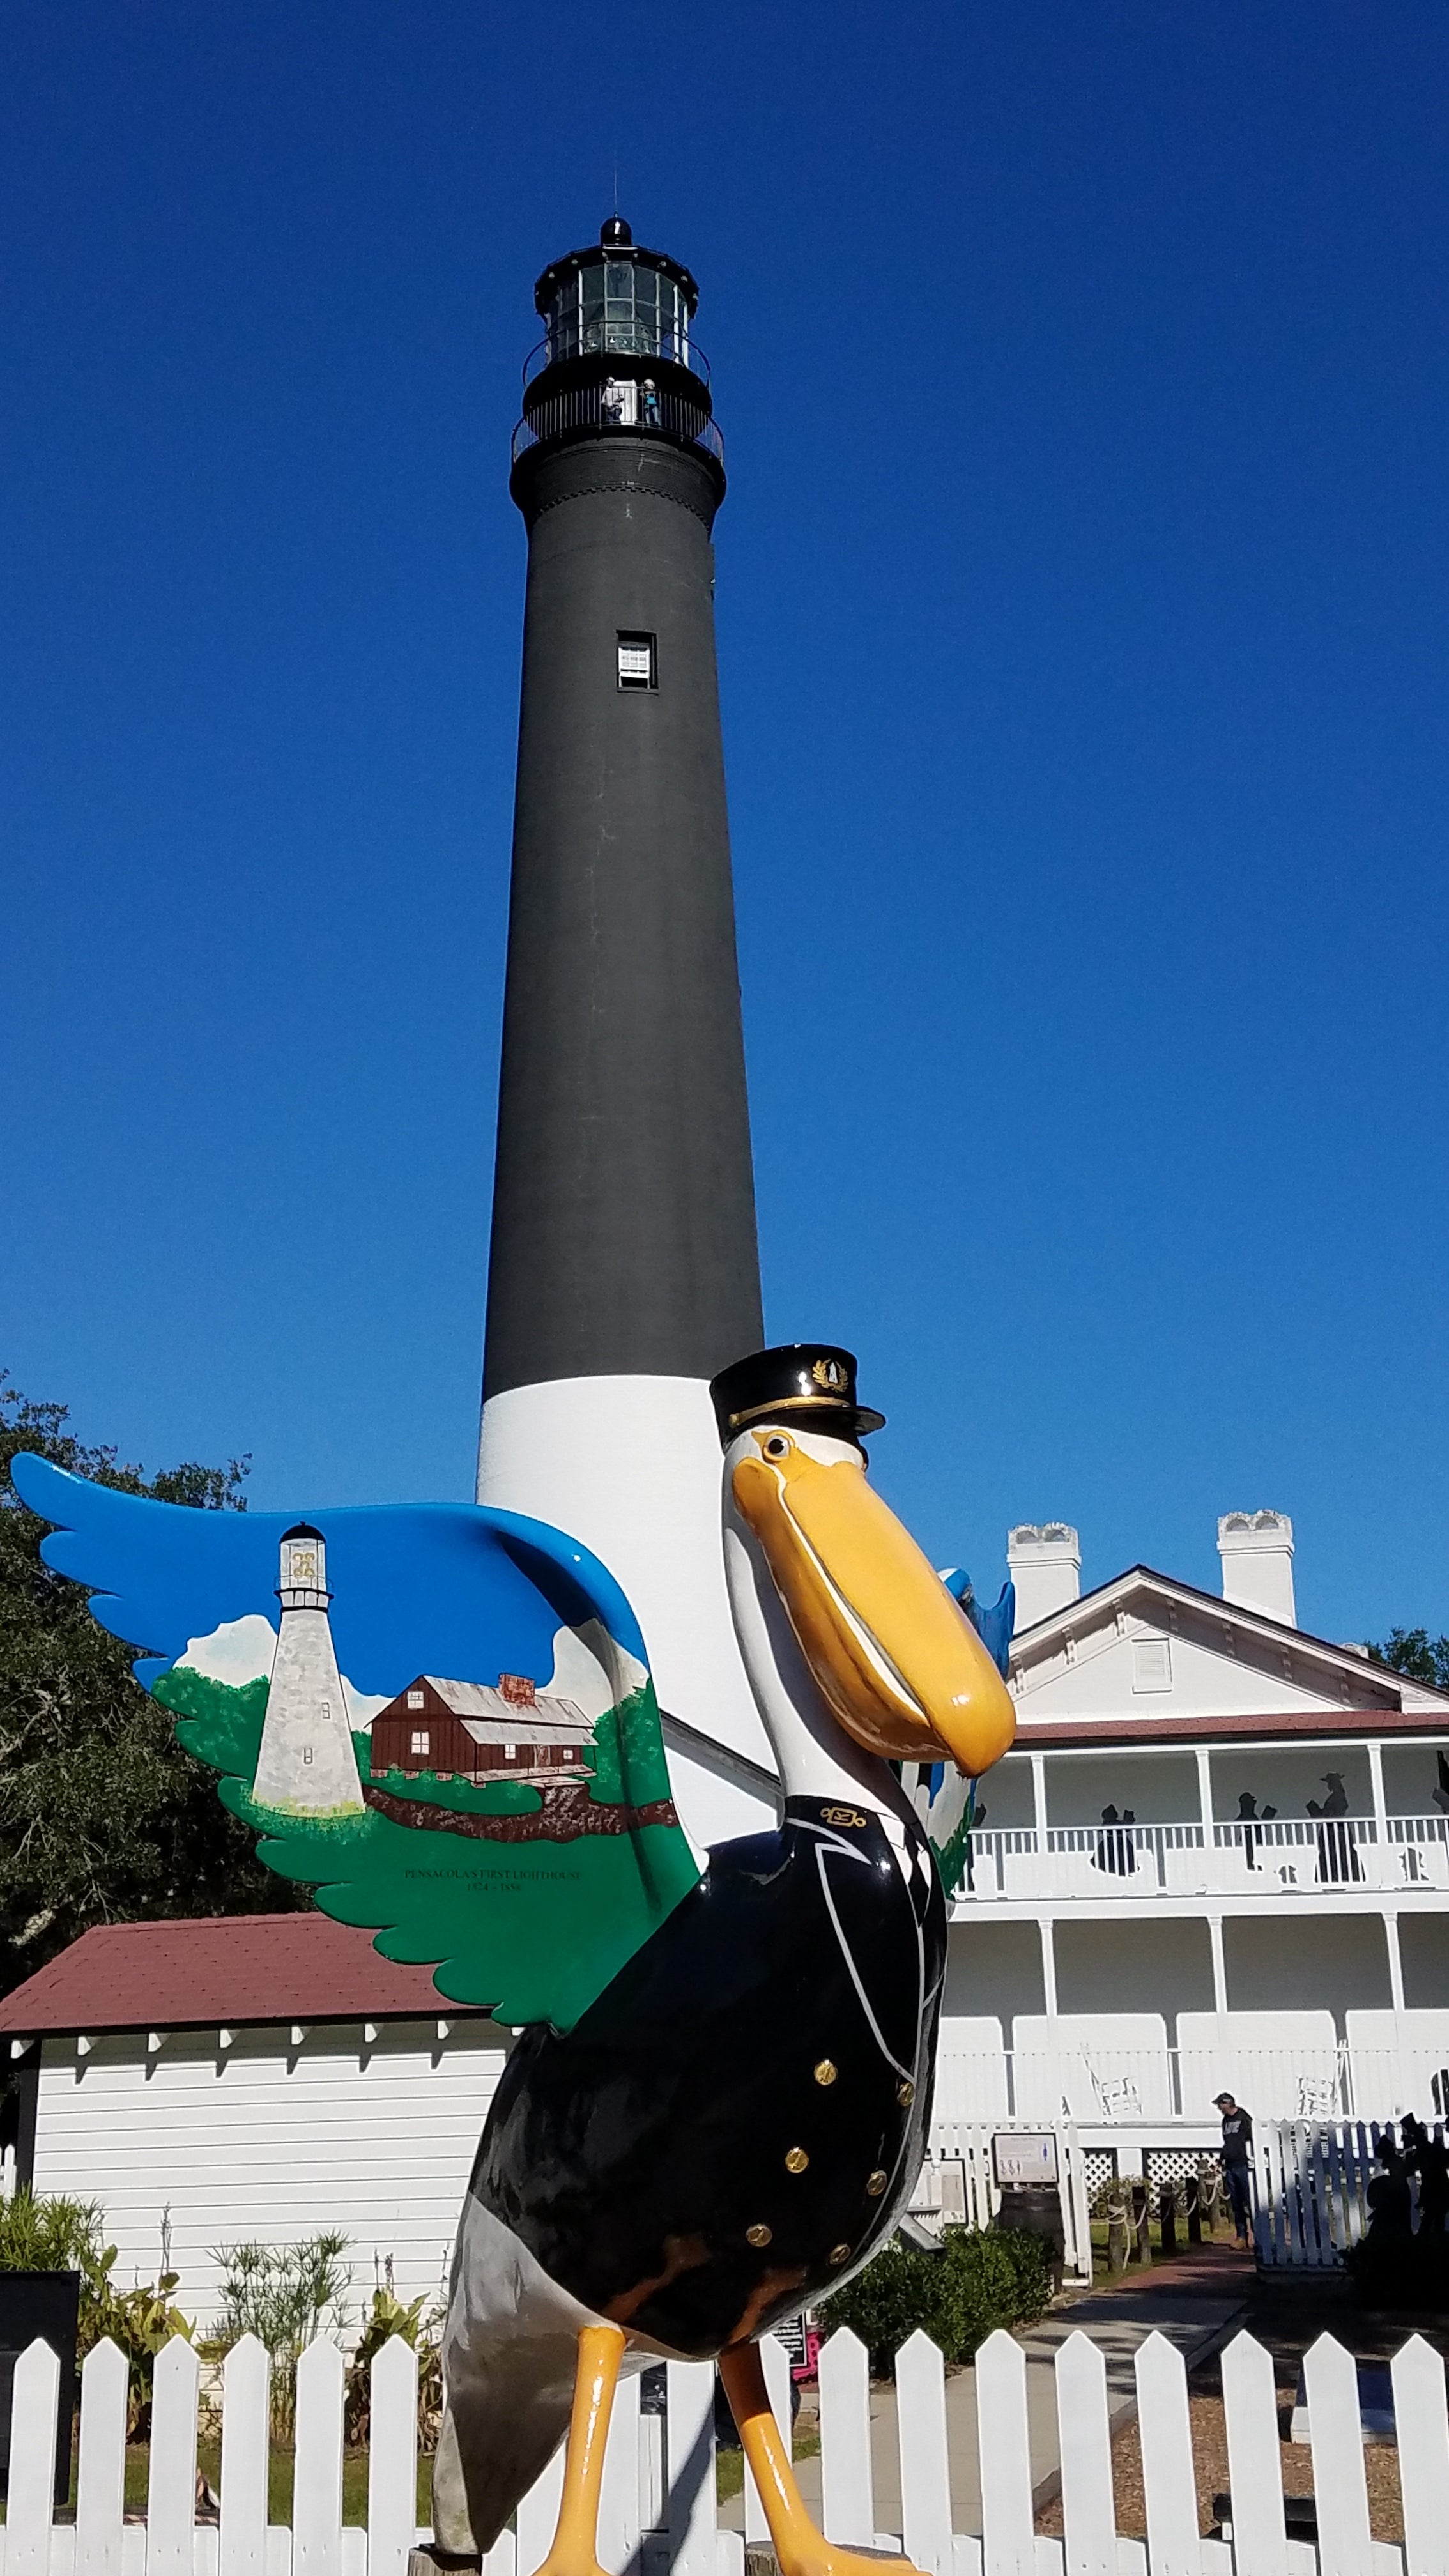 This is not at the park, but it's the Pensacola Lighthouse with Jeremiah Pelican at the Naval Air Station. The Blue Angels are based at the NAS.